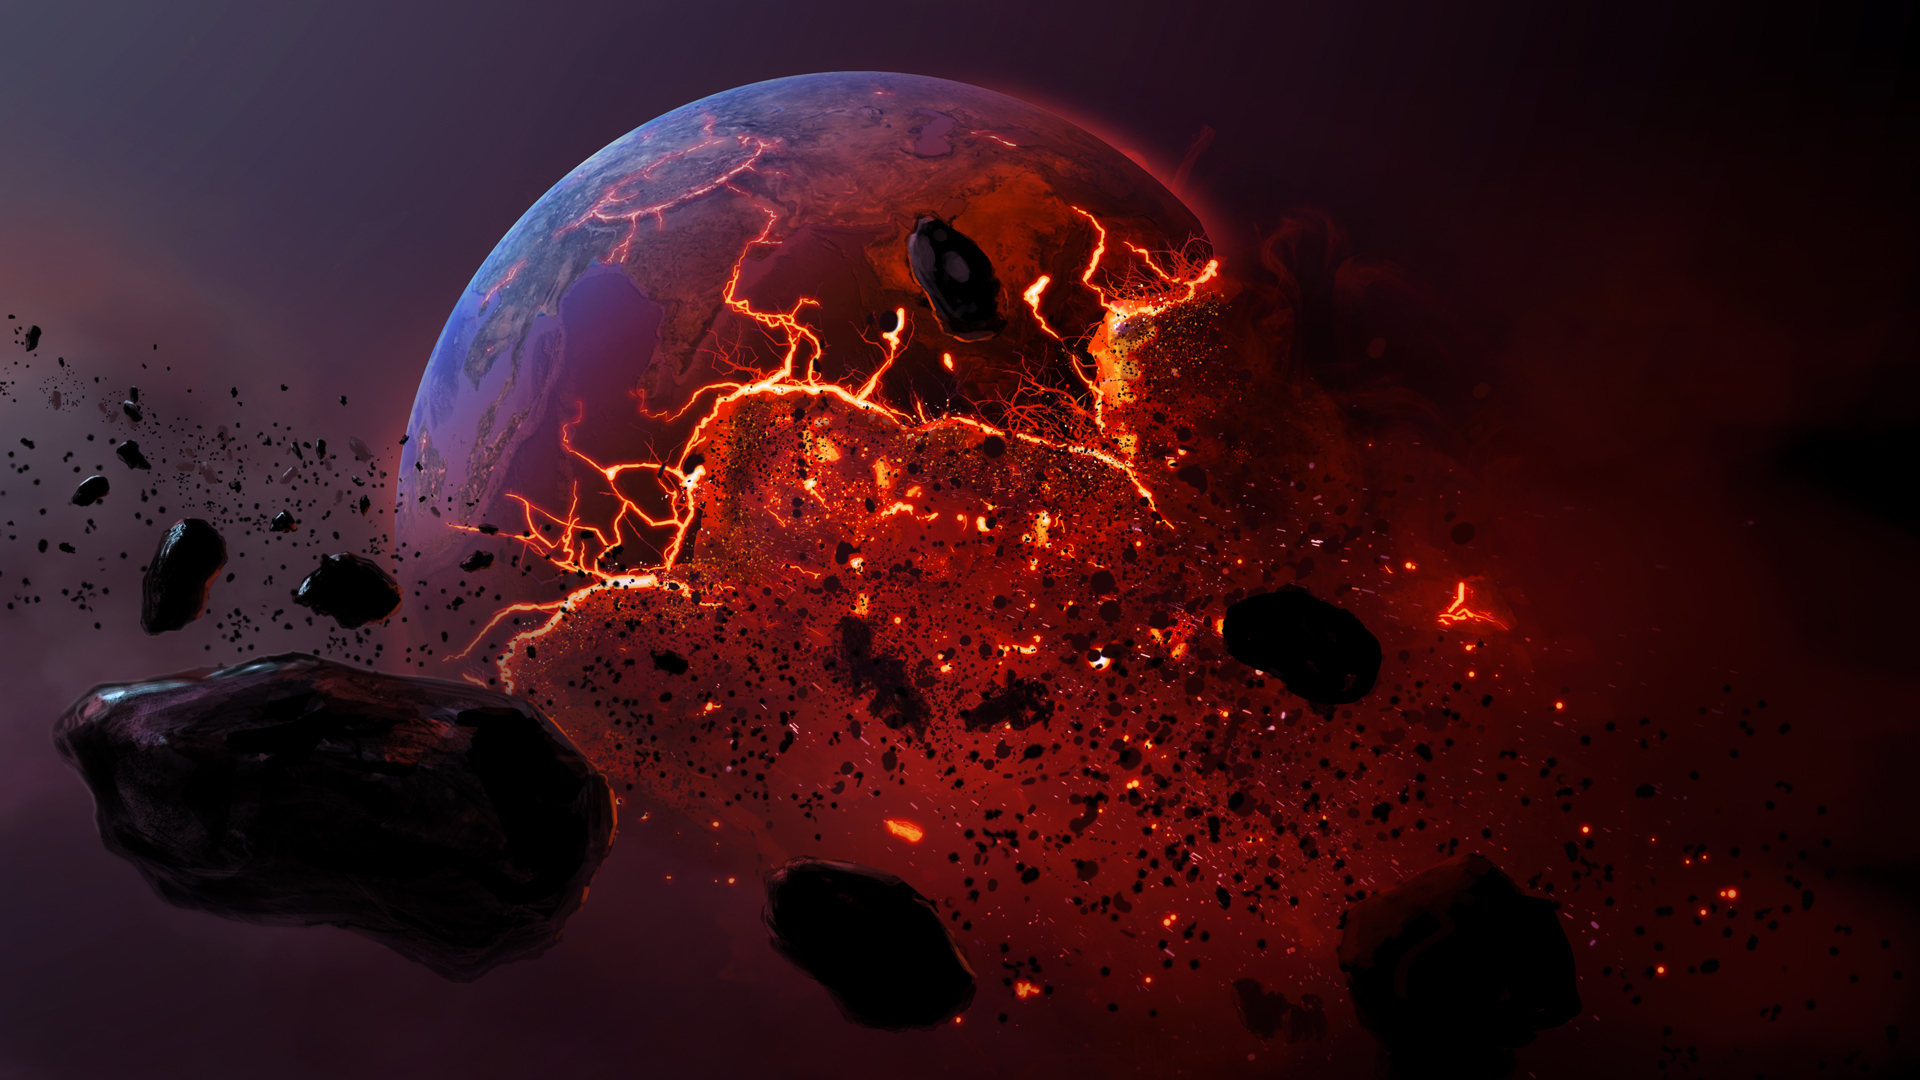 meteor, Burning, Earth, Planet, Apocalyptic Wallpaper